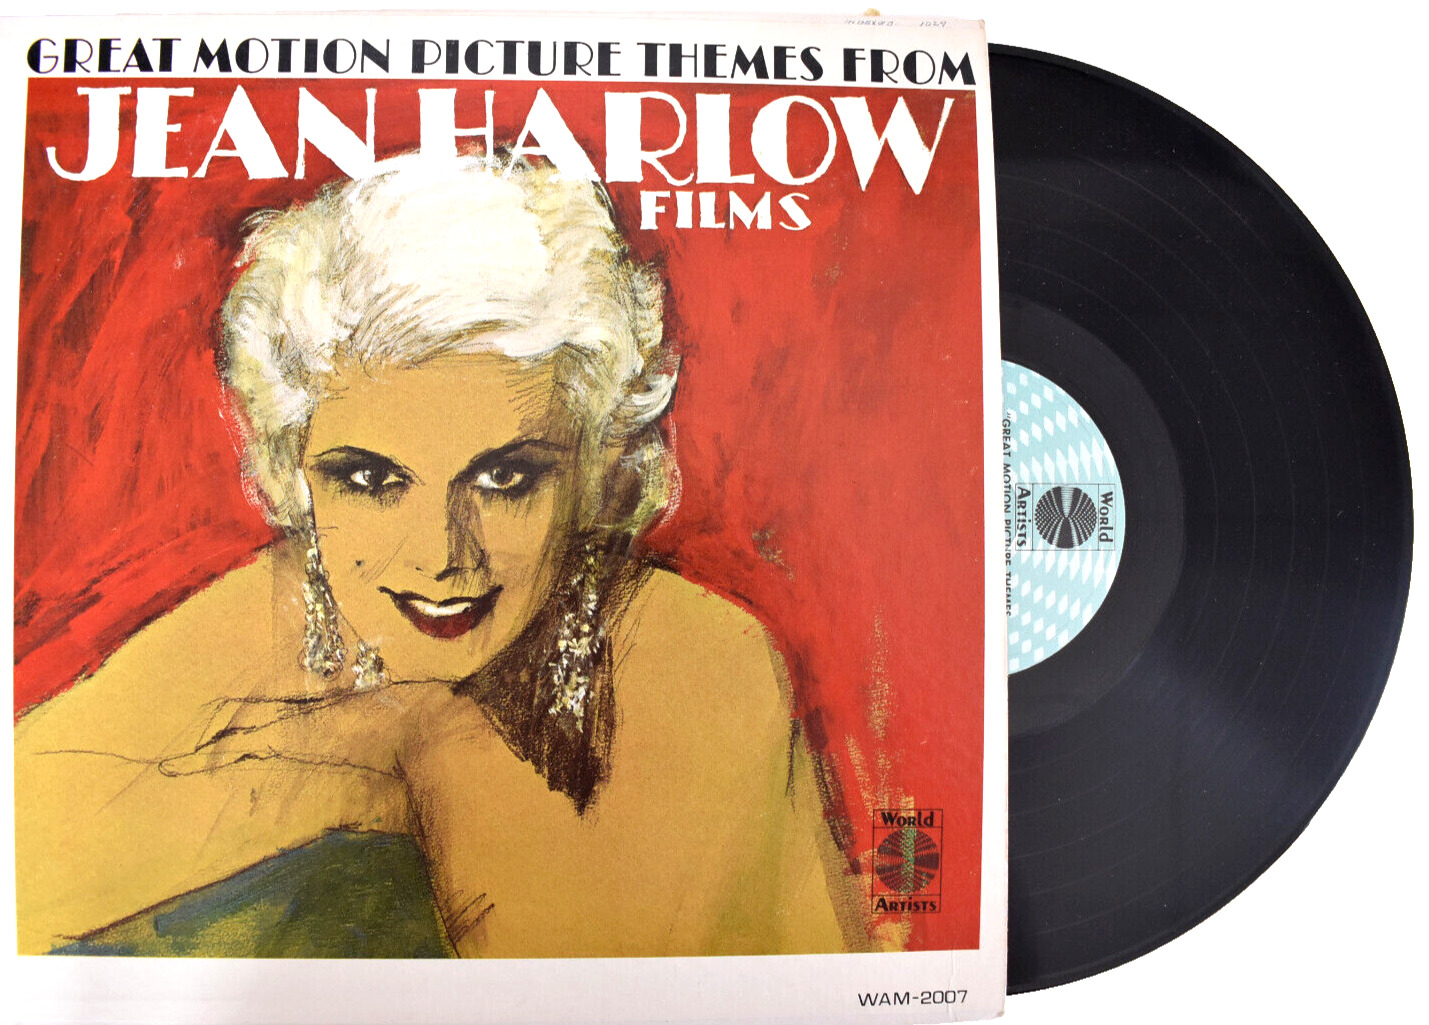 JEAN HARLOW FILMS MOTION PICTURE THEMES SOUNDTRACK OST VINYL LP RECORD 1965